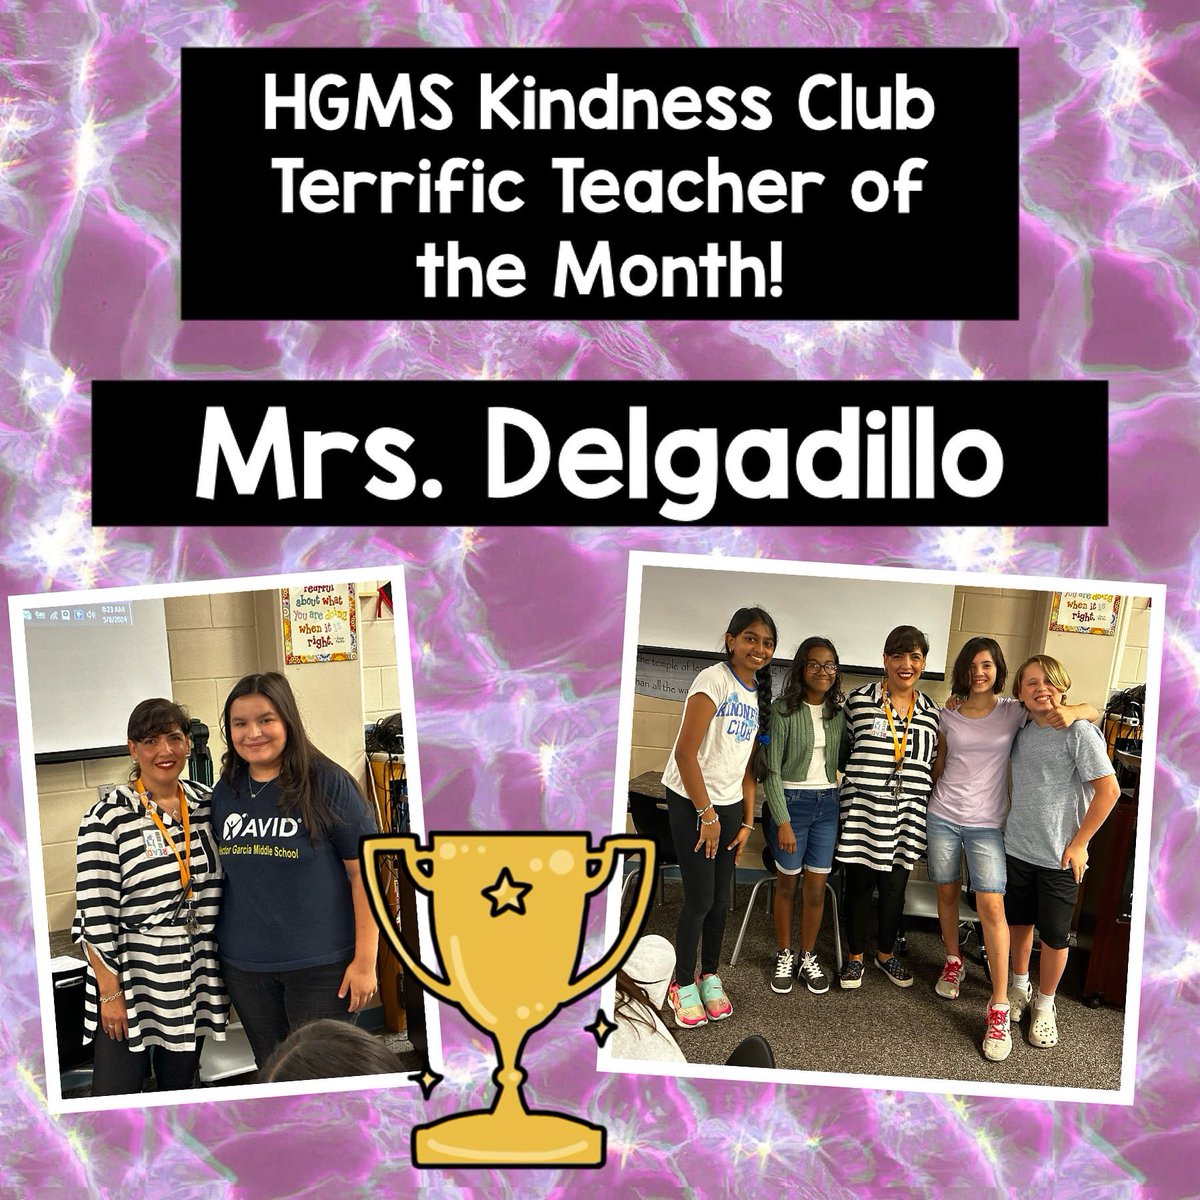 Congrats to our awesome Librarian, Mrs. Delgadillo, for winning the HGMS Kindness Club 'Terrific Teacher' of the month! Voted on by our students! Great job! 🎉🎉 @NISDGarciaLib @NISDGarcia